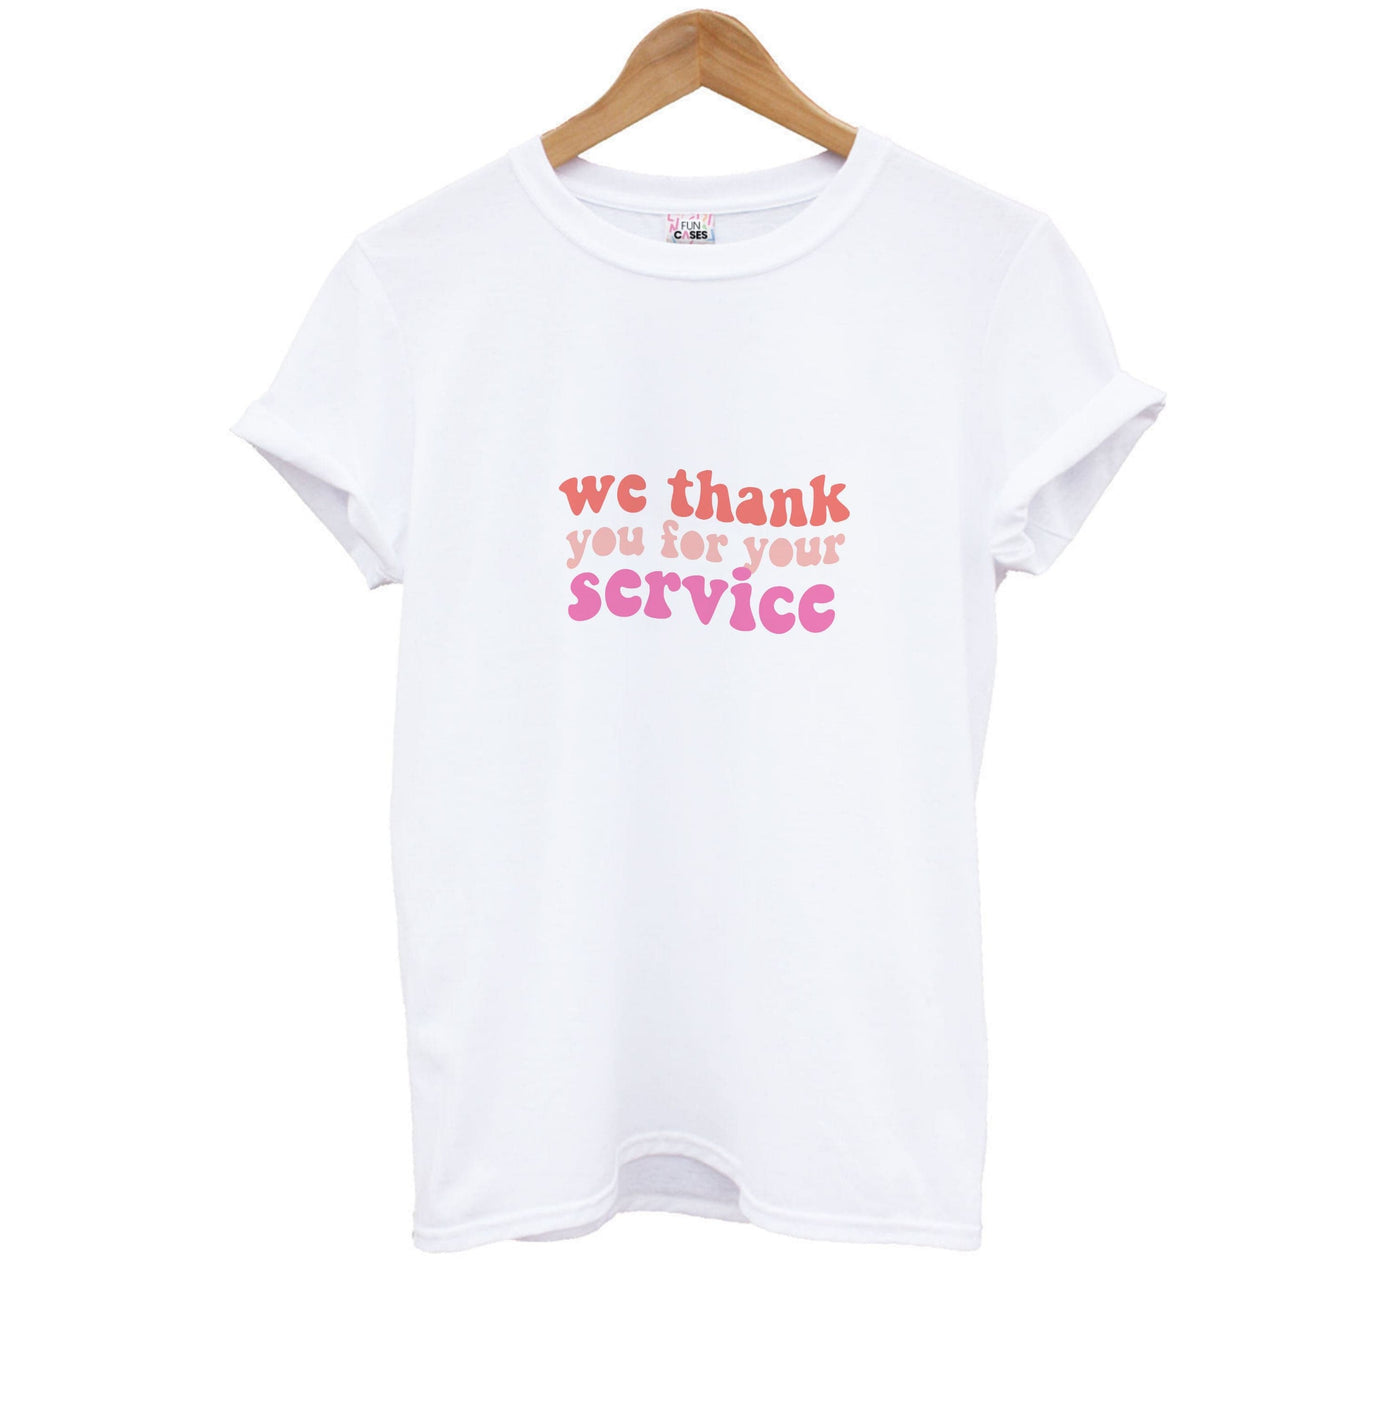 We Thank You For Your Service - Heartstopper Kids T-Shirt